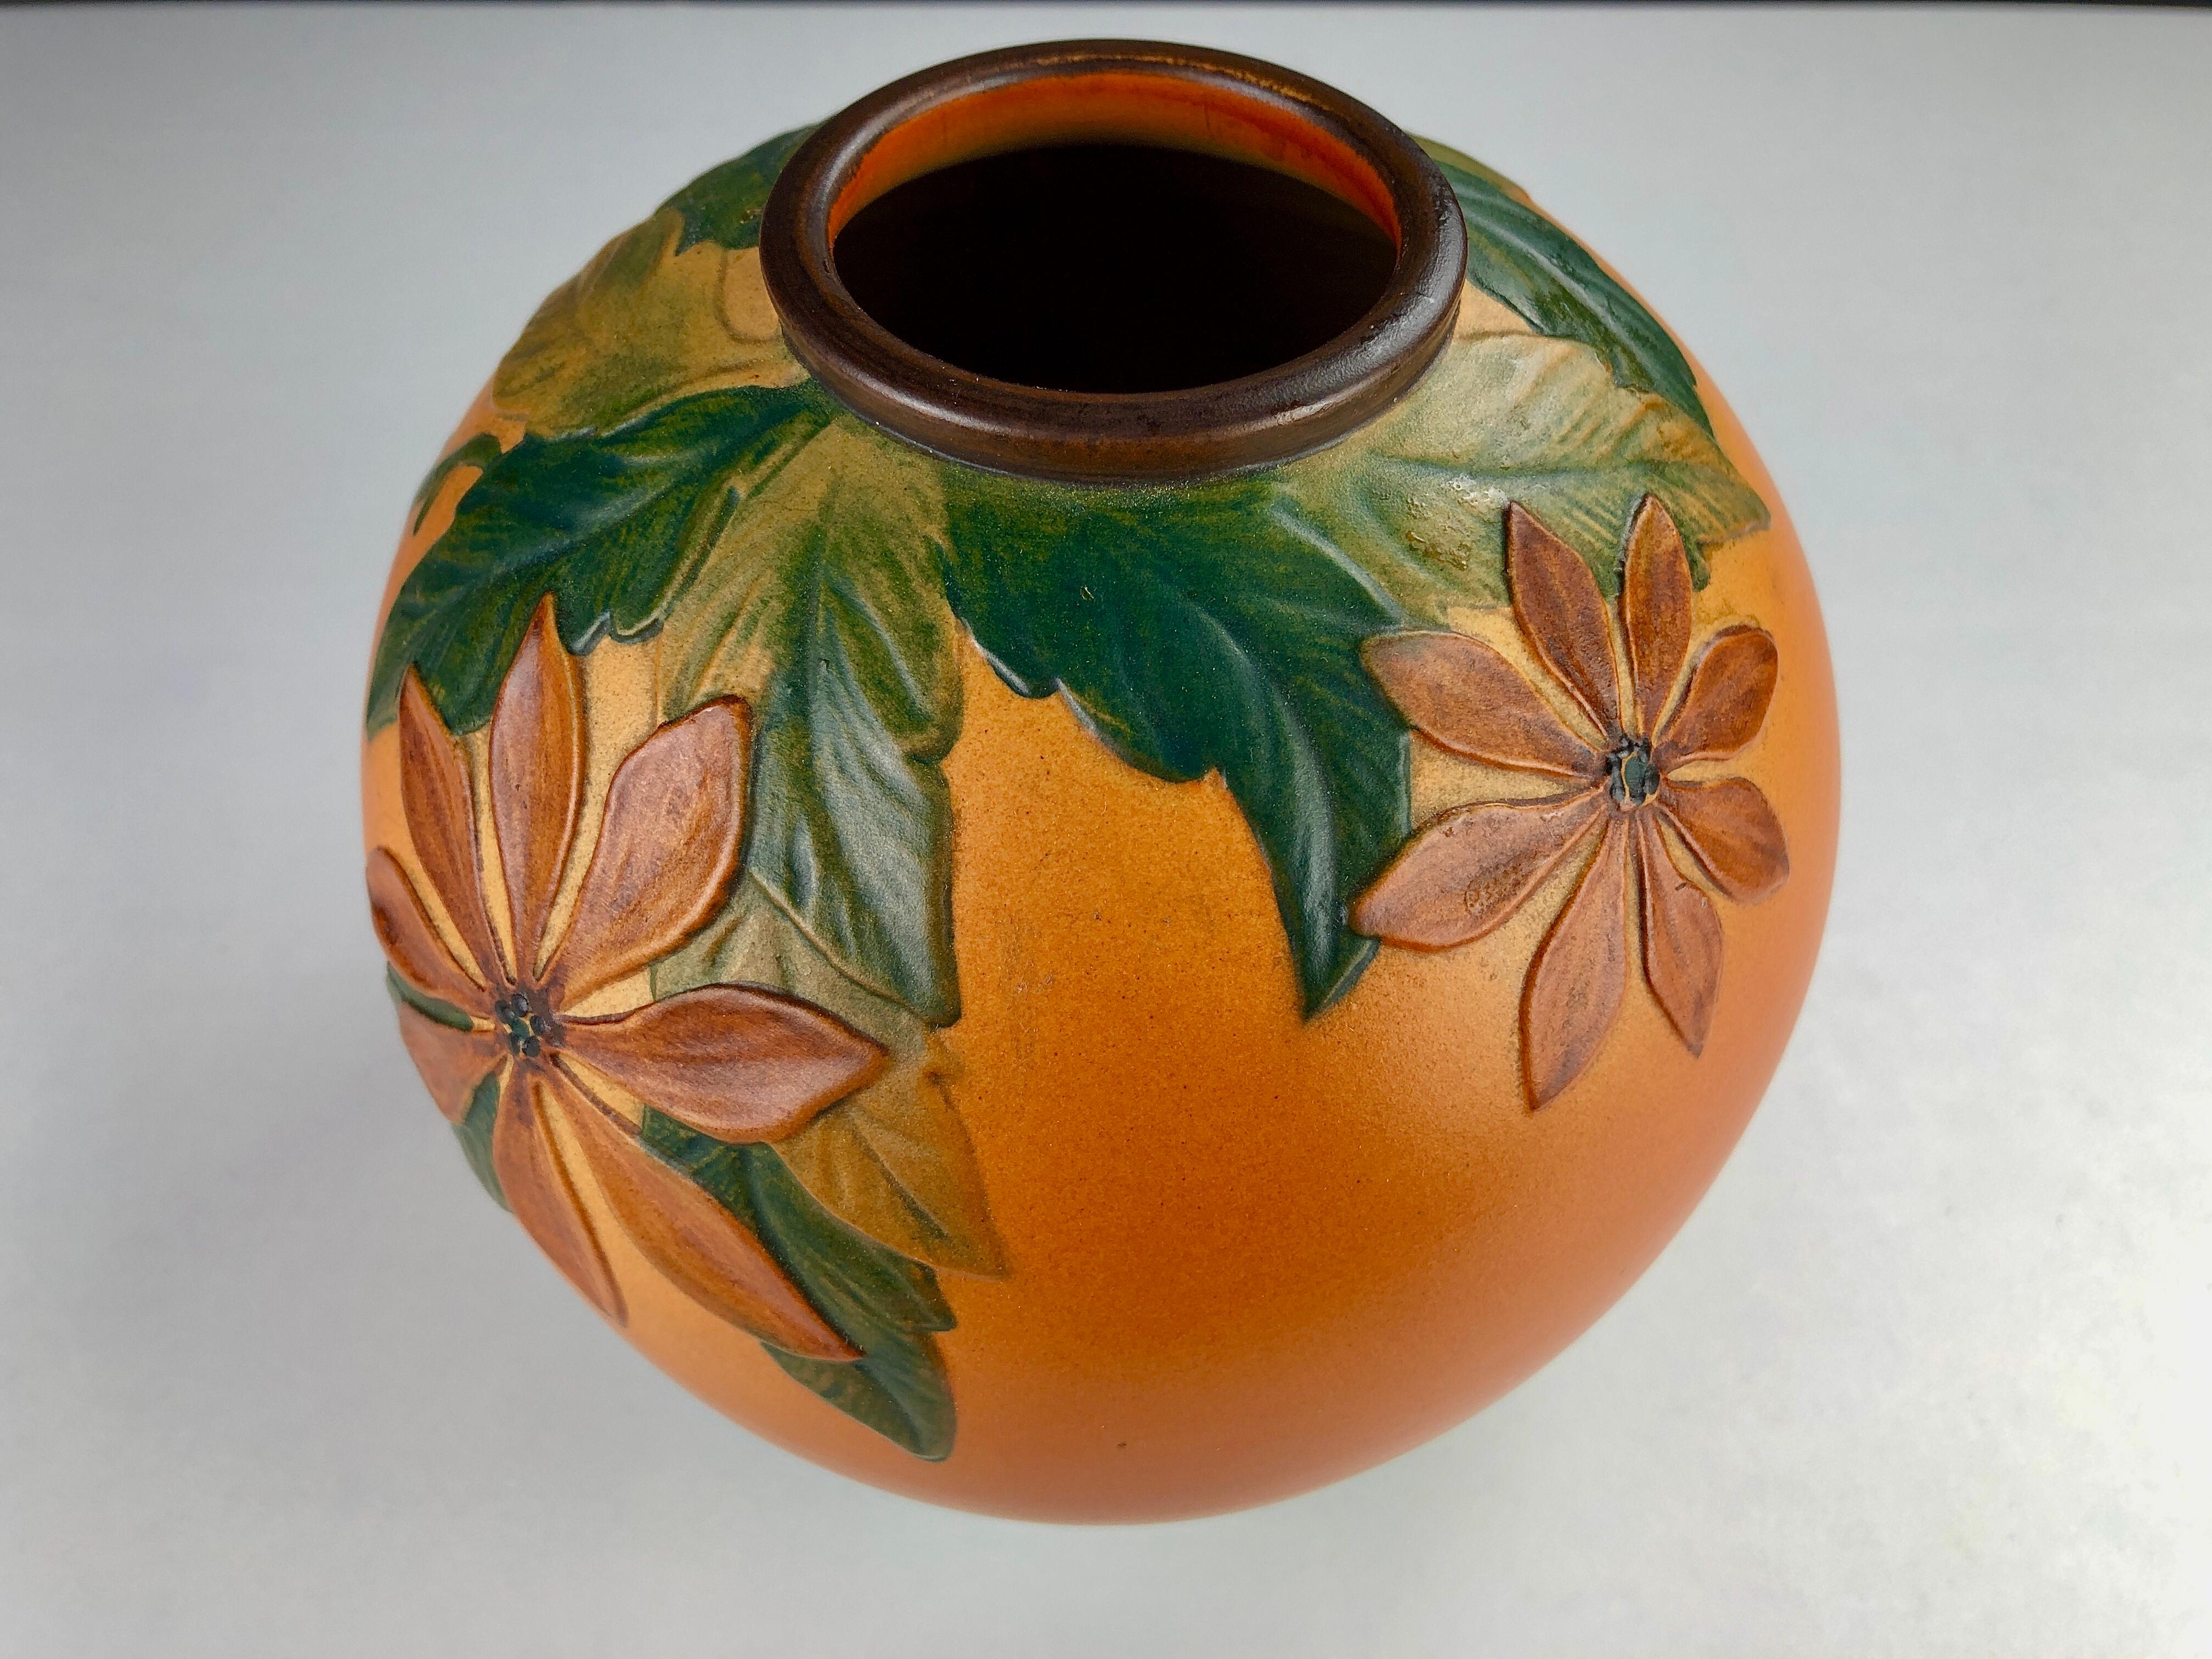 1930´s Art Nouveau Flower Decorated Vase by Axel Sorensen for P. Ipsens Enke In Good Condition For Sale In Knebel, DK